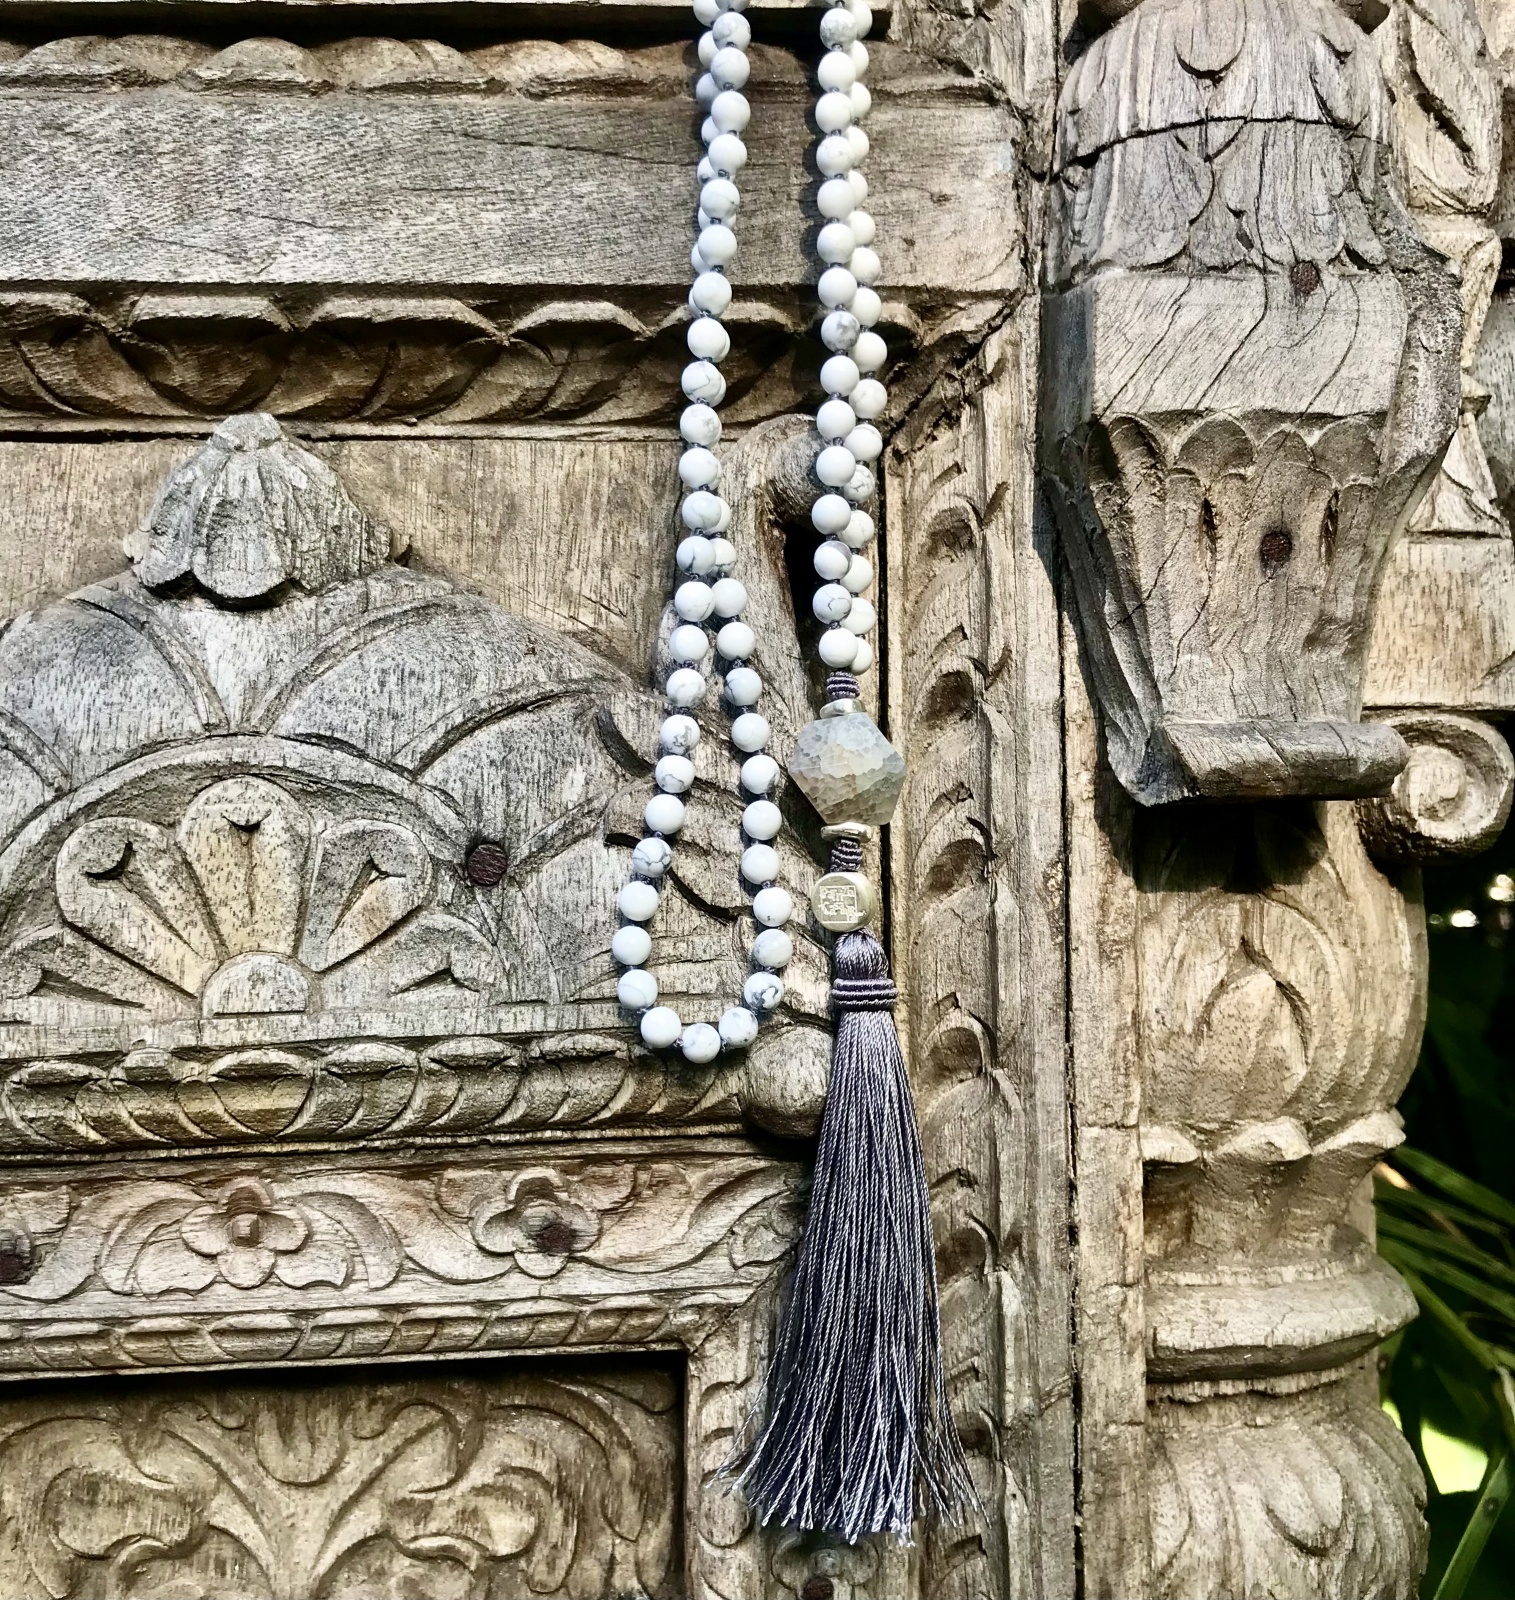 One of a Kind Mala - €159
Sold
Every piece is a one of a kind

Details

Matt Howlite - smoked white quartz
925 Sterling Silver
Length cm.77
High Polished Finish
Nickel-free
Handmade
Engraved with Patrizia Casamirra Jewels Logo